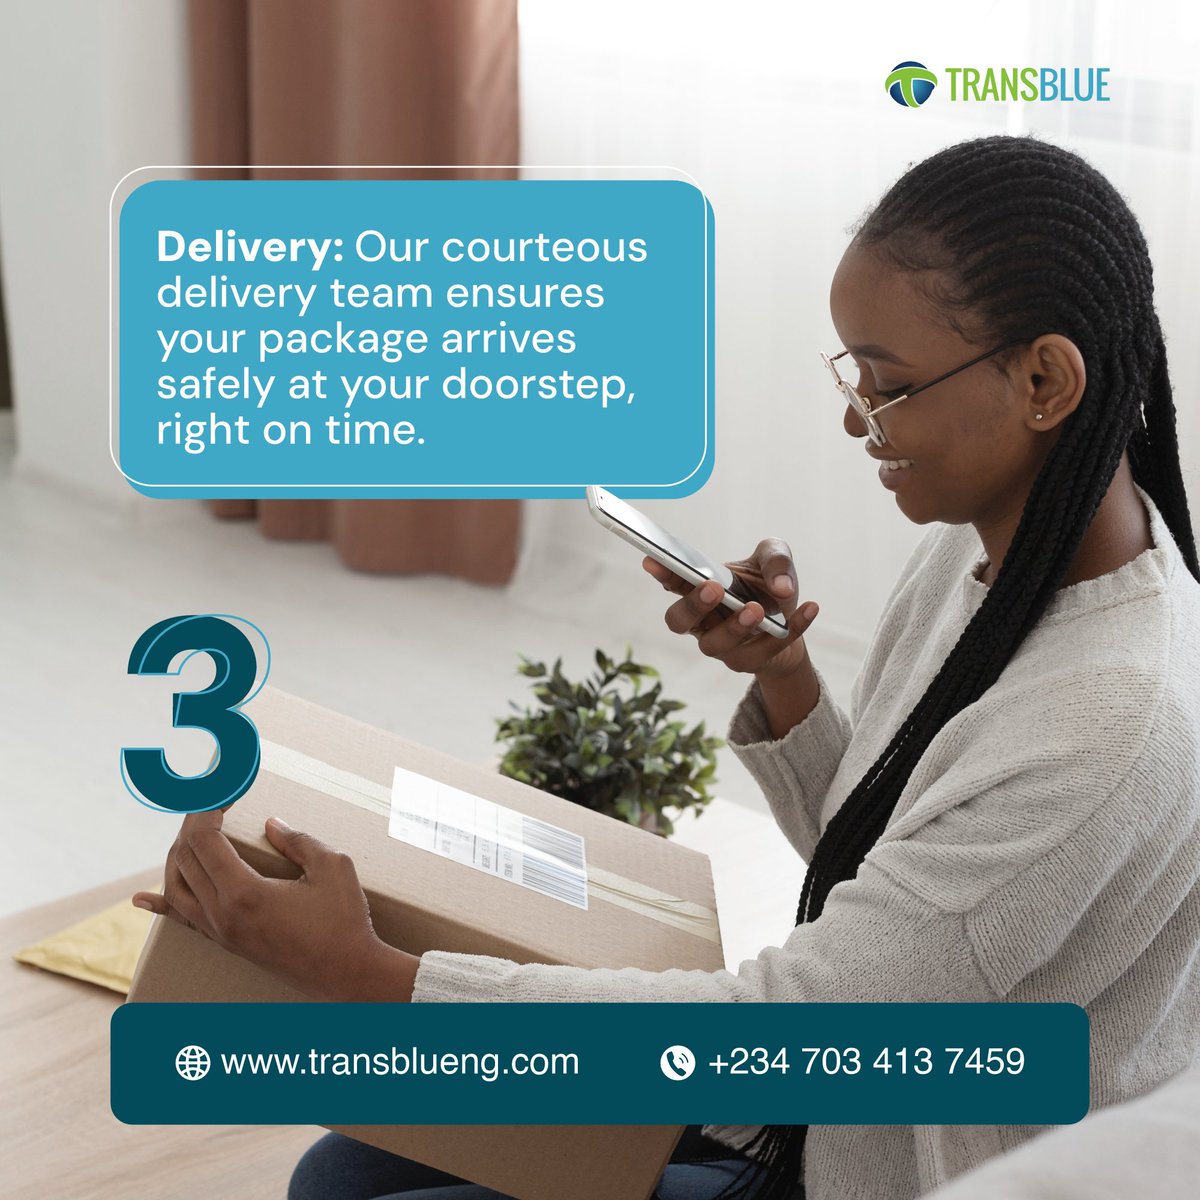 From pickup to doorstep delivery, experience the seamless journey of your package with Transblue. Our reliable logistics process ensures your items reach you safely and on time, every time. #TransblueLogistics #SeamlessDelivery #HassleFreeShipping